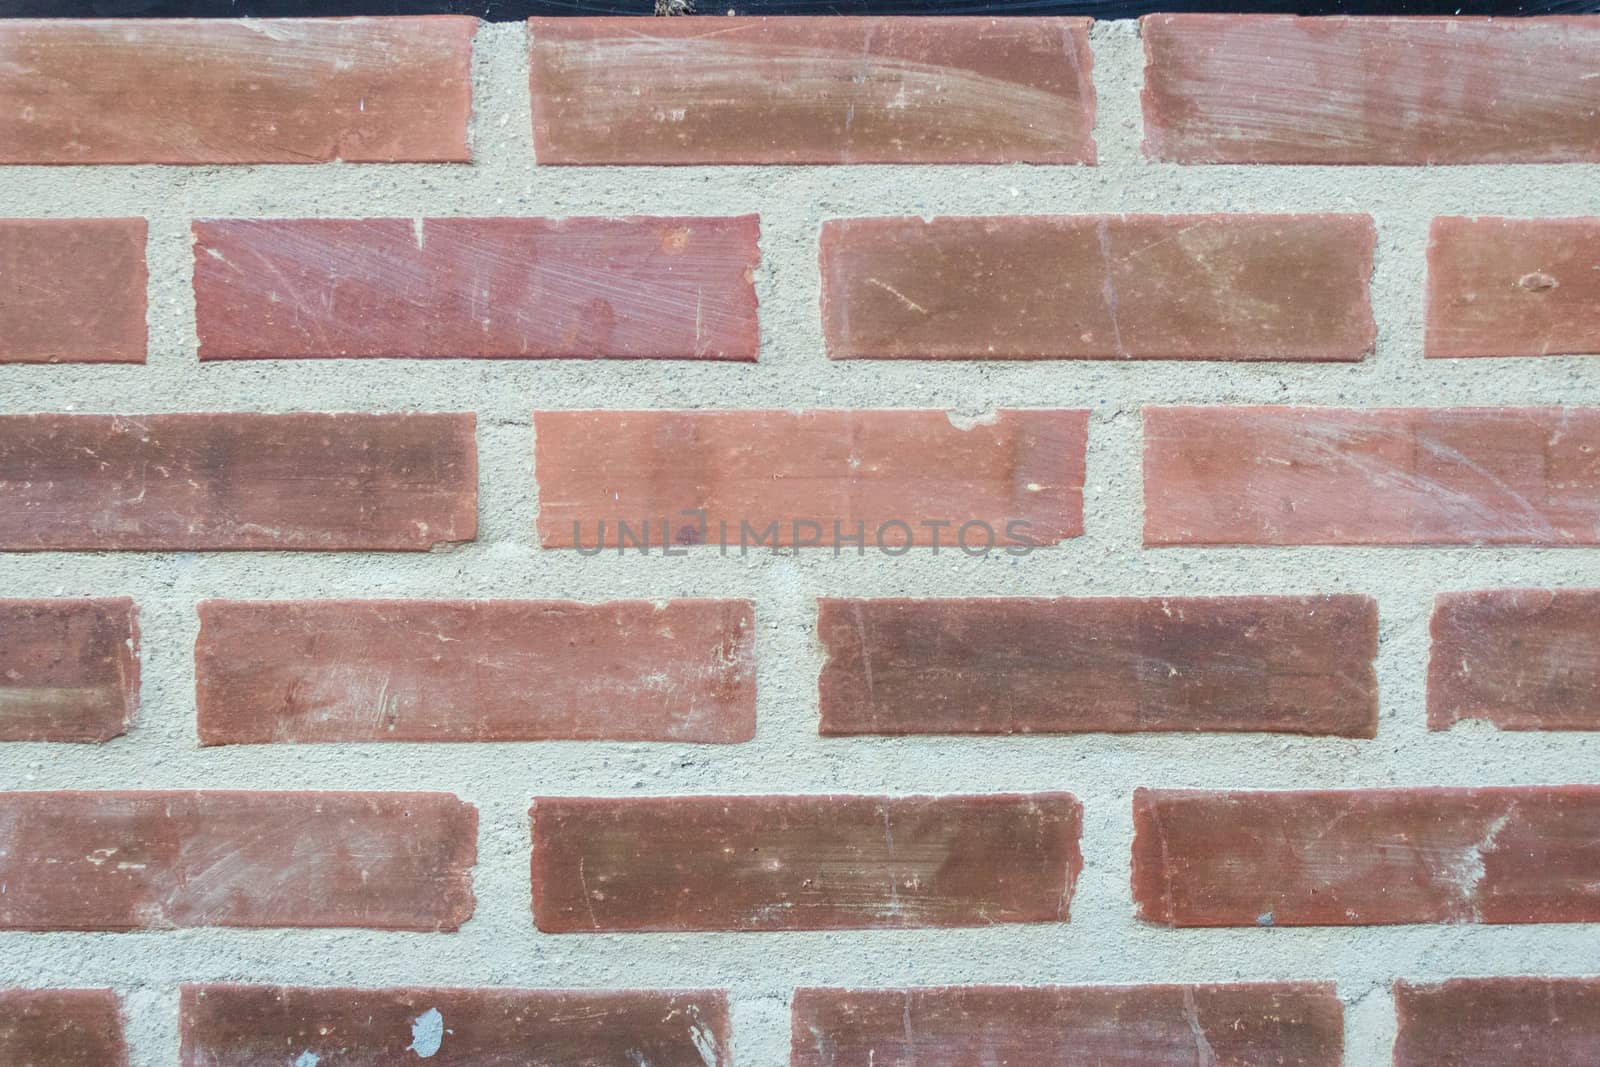 Brick wall outside a house with a vintage looking